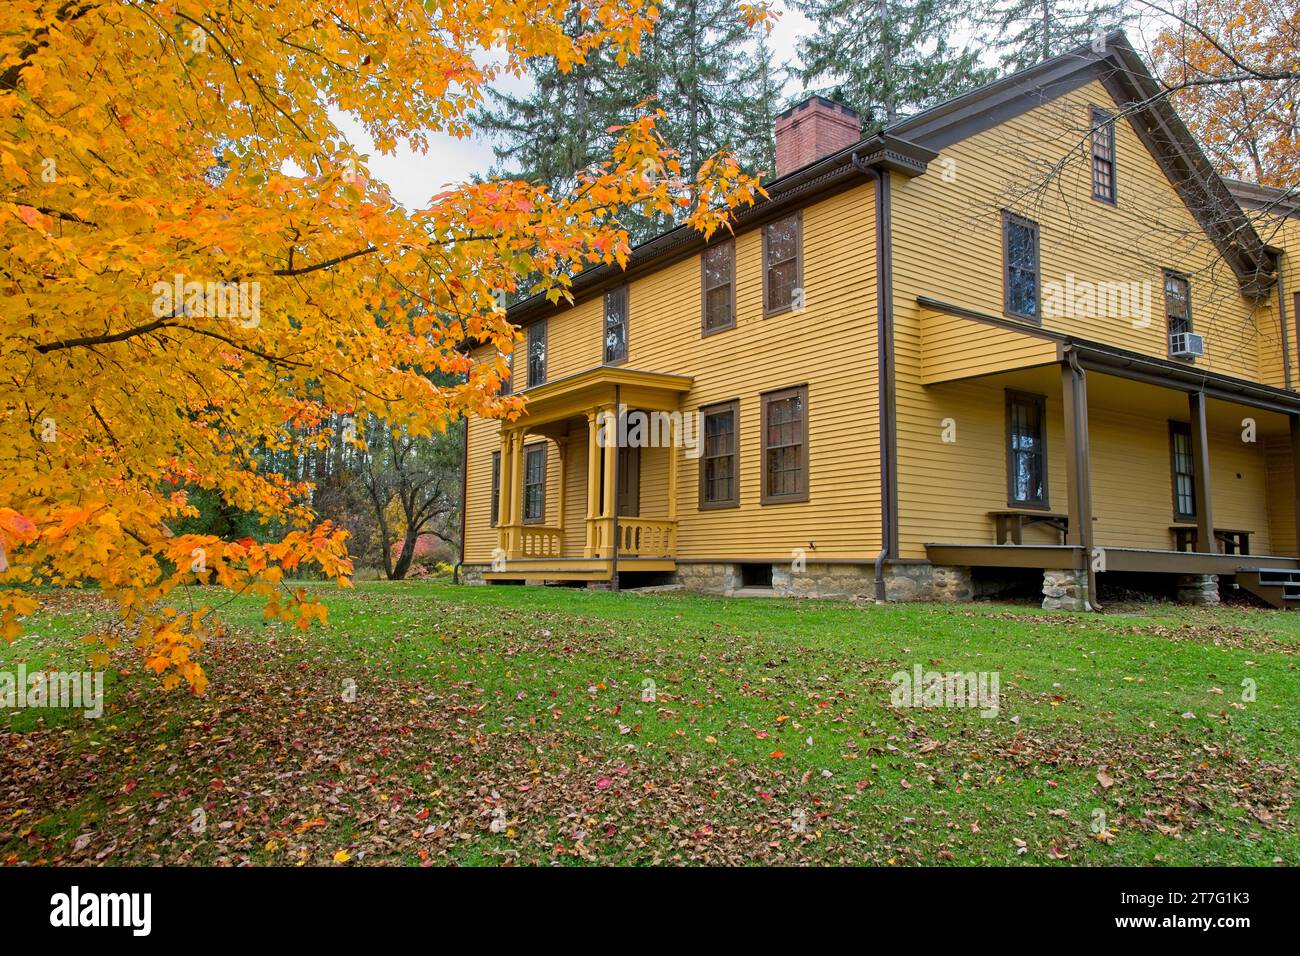 Herman Melville’s 18th century Arrowhead farmhouse surrounded with autumn colored trees in Pittsfield Massachusetts Stock Photo